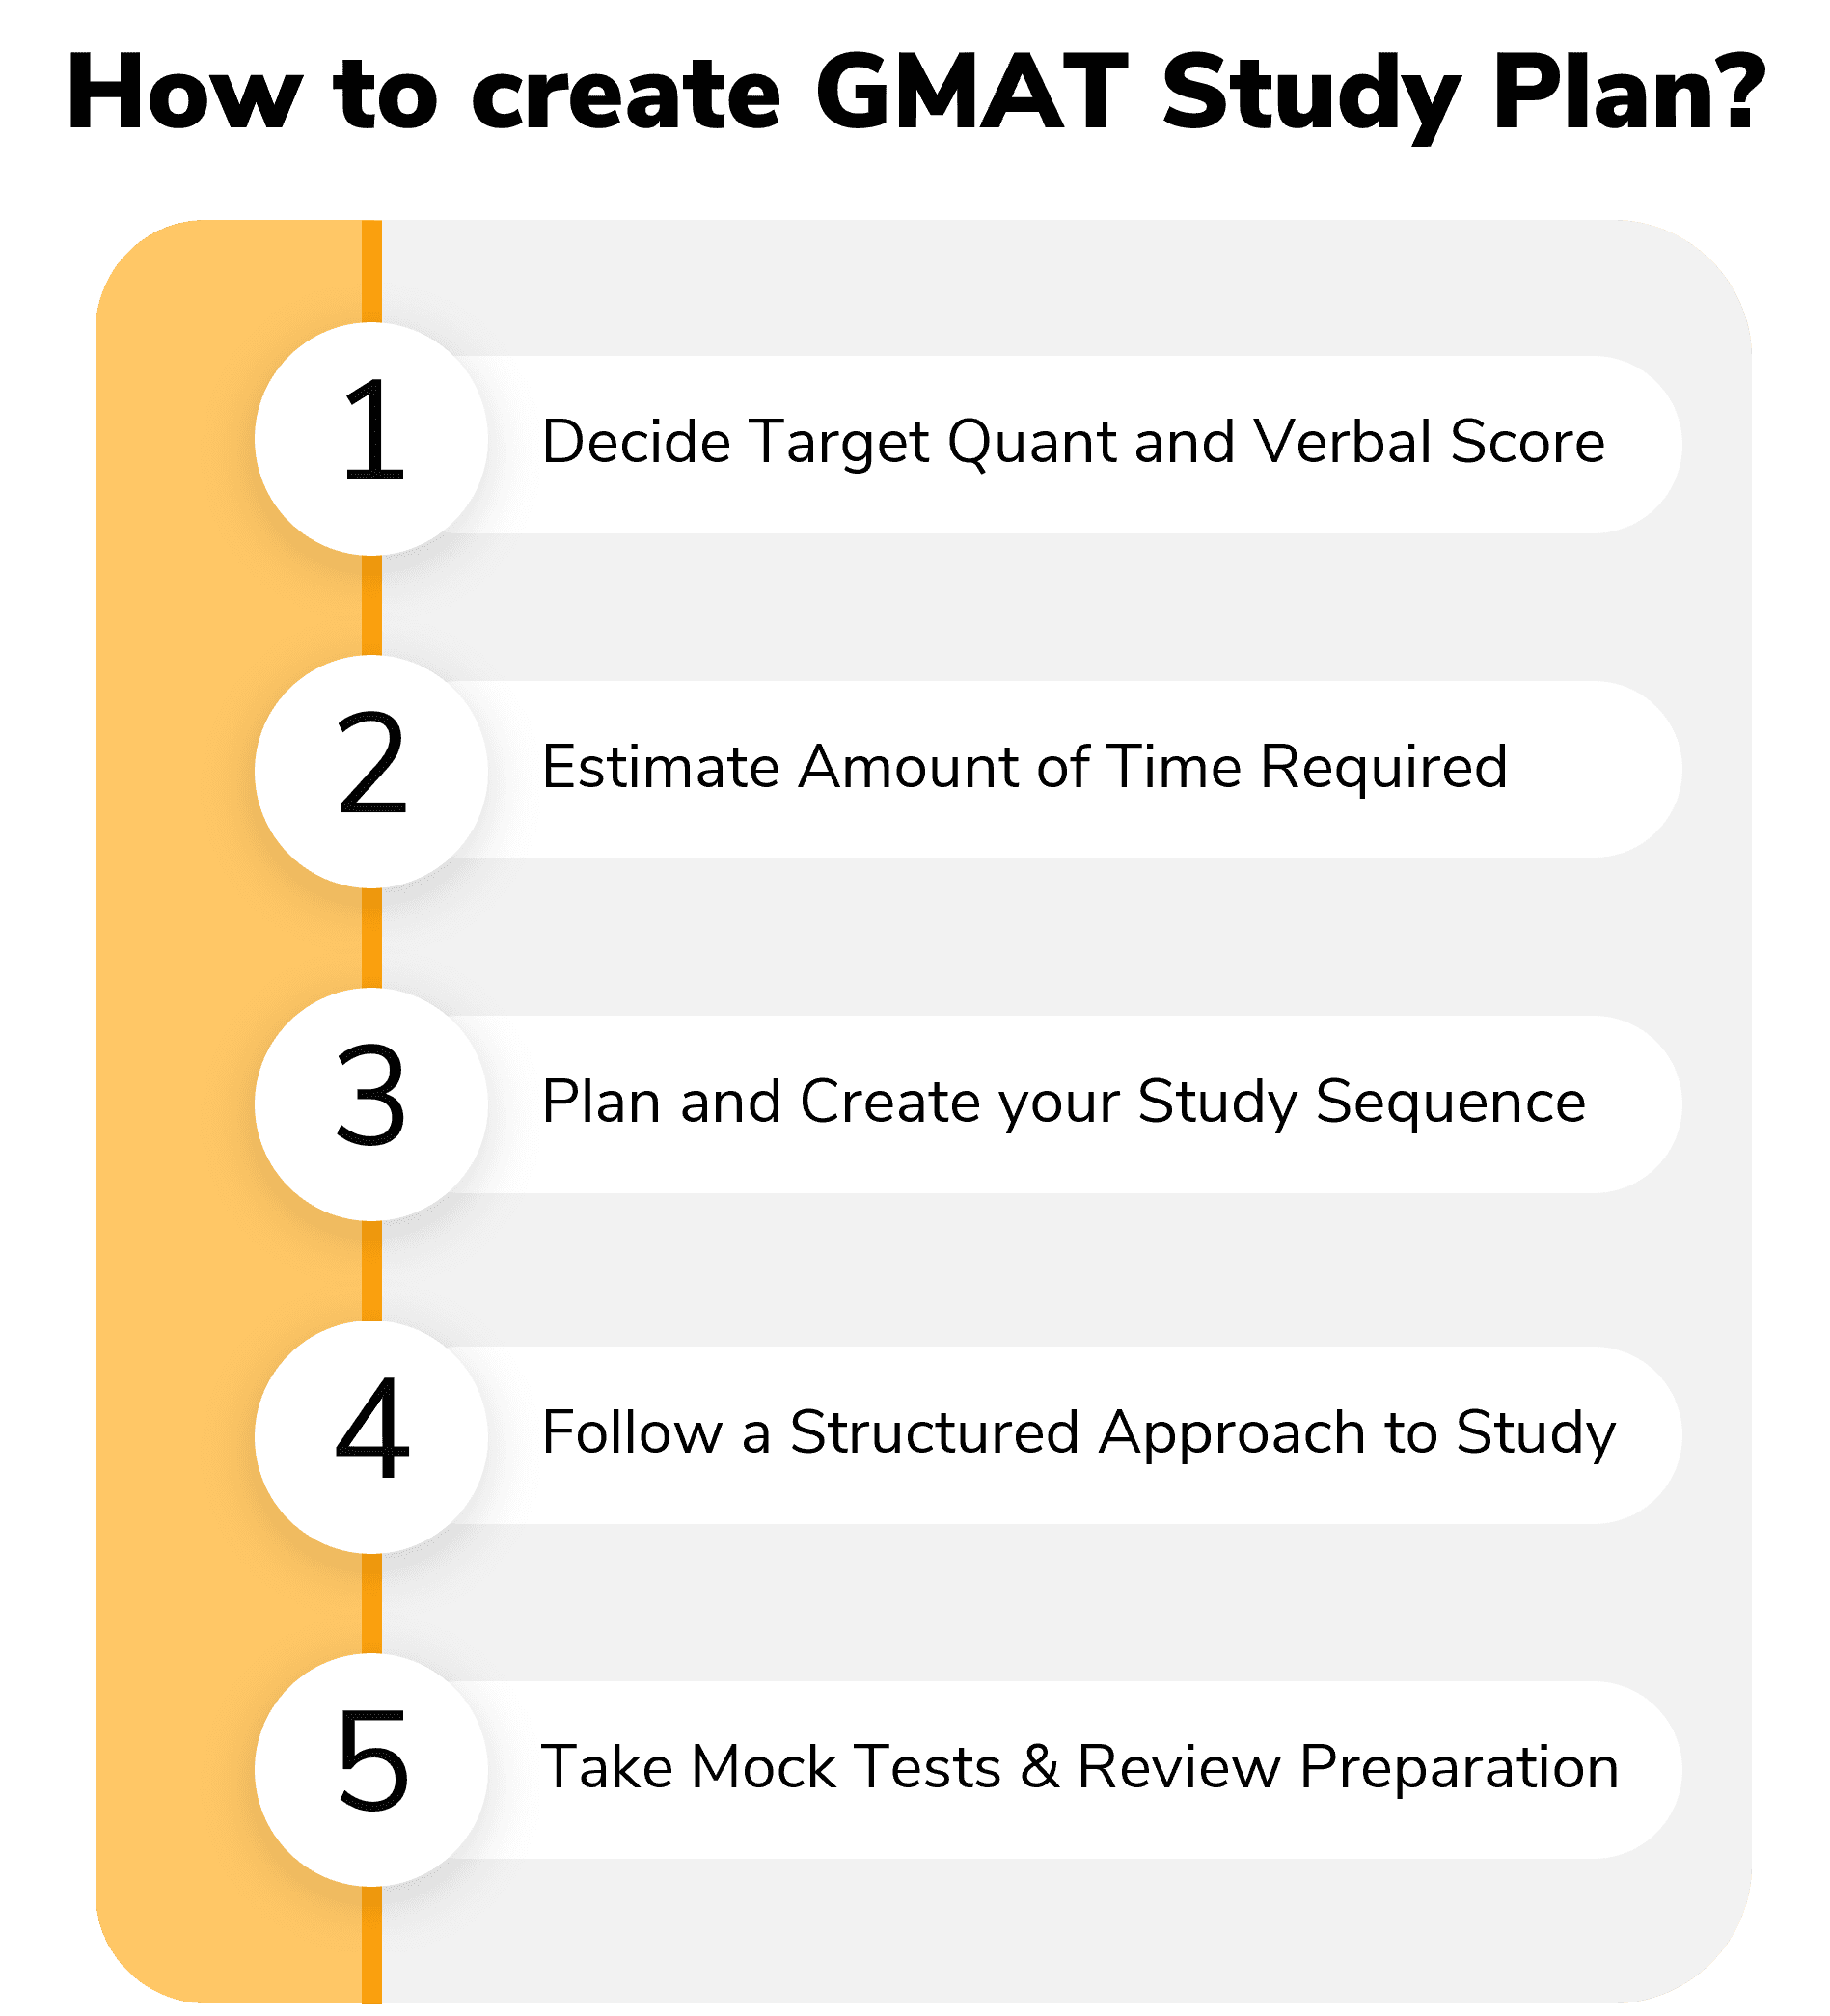 How to create GMAT Study Plan